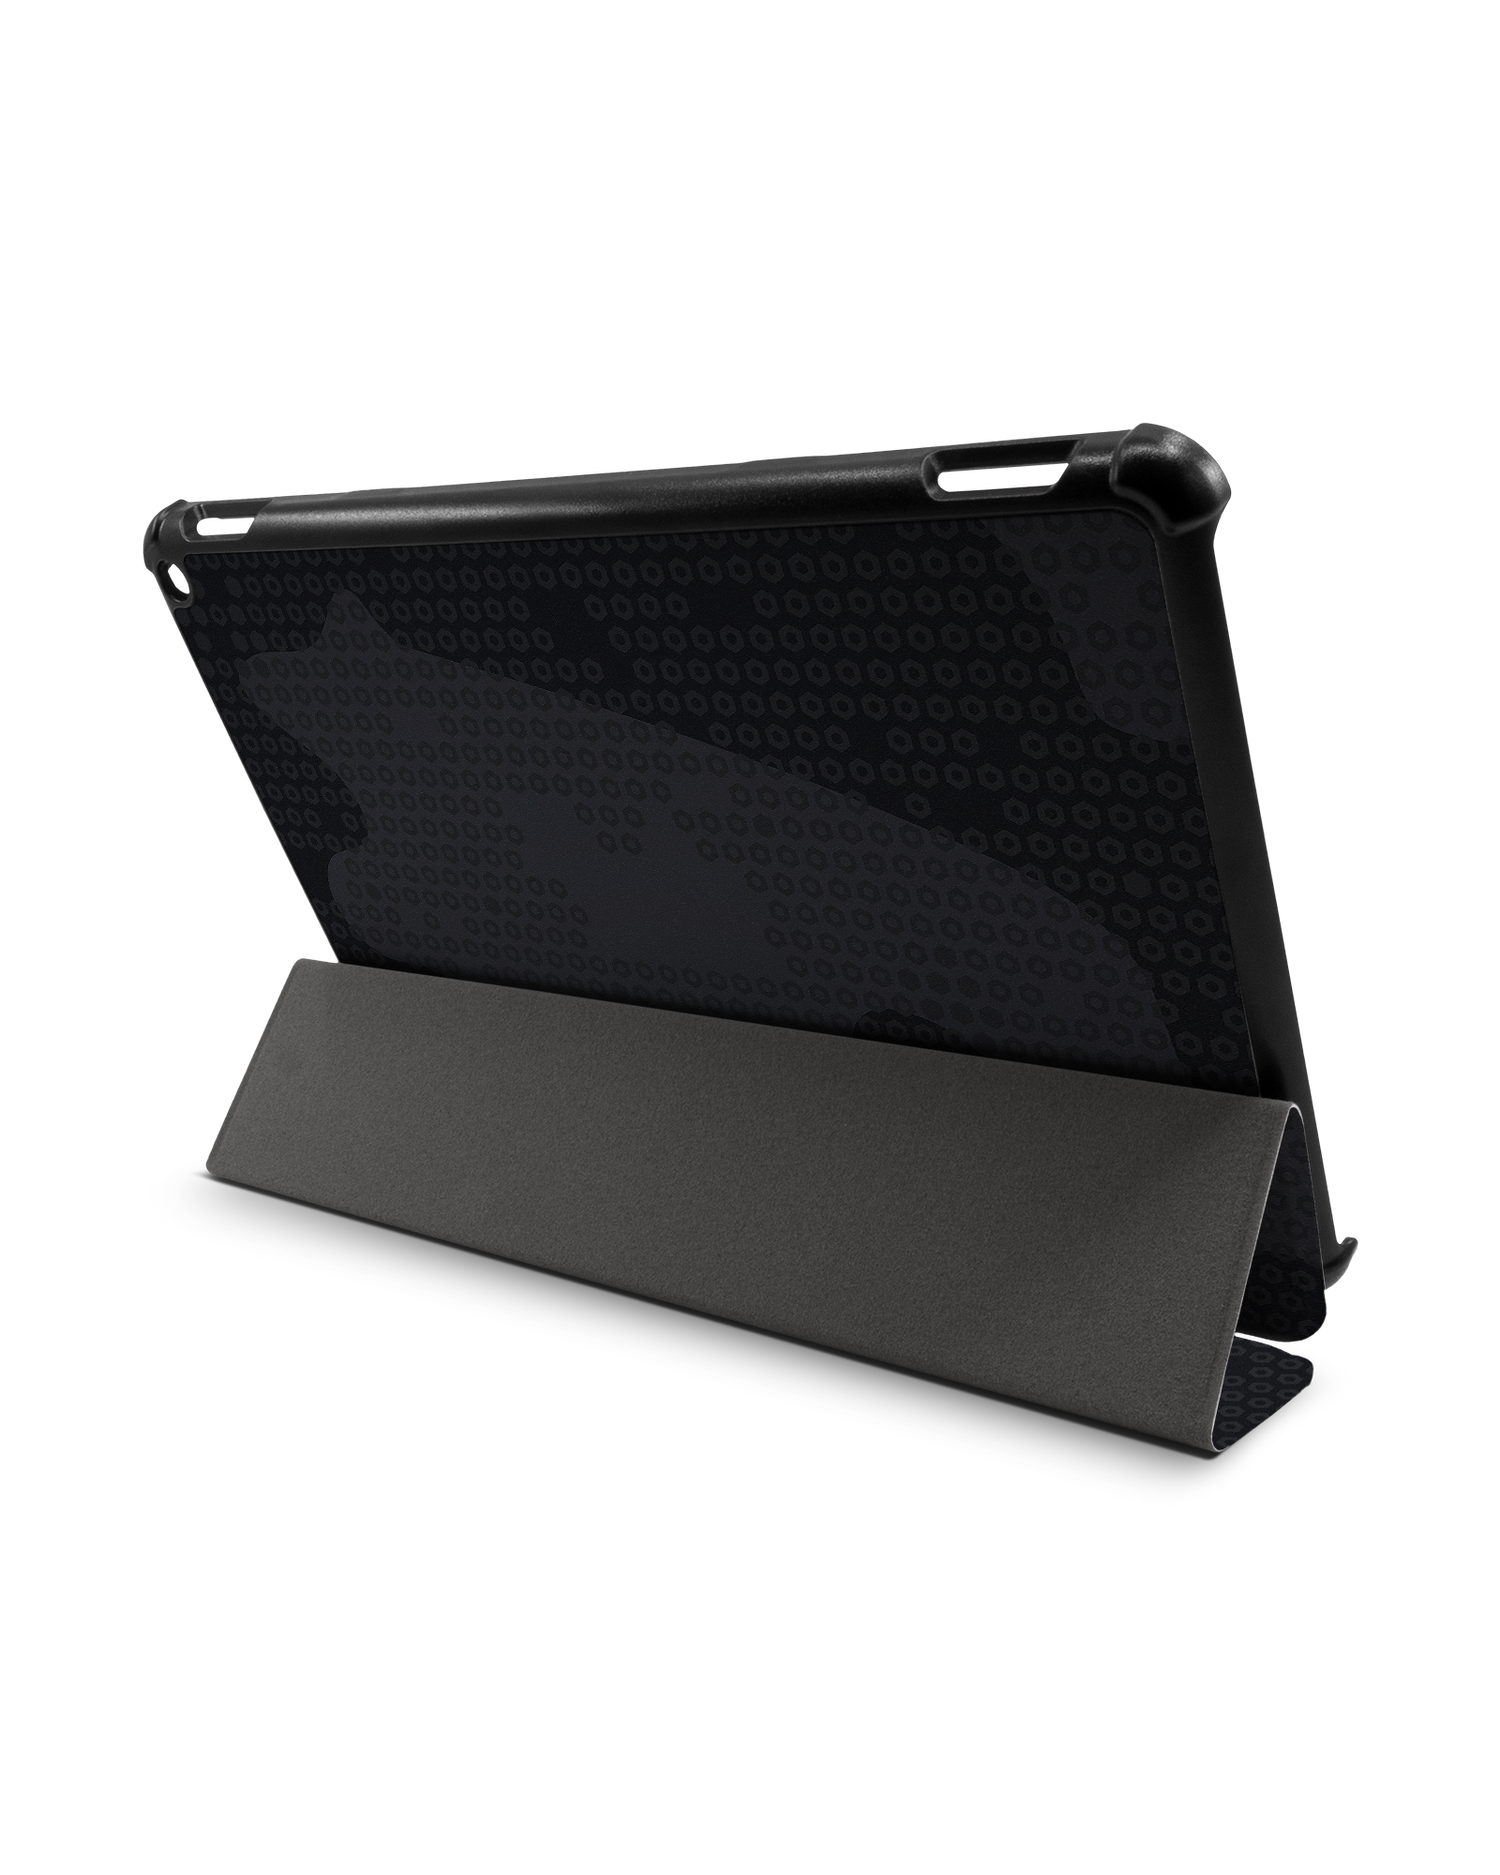 Spec Ops Dark Tablet Smart Case for Amazon Fire HD 10 (2021): Used as Stand